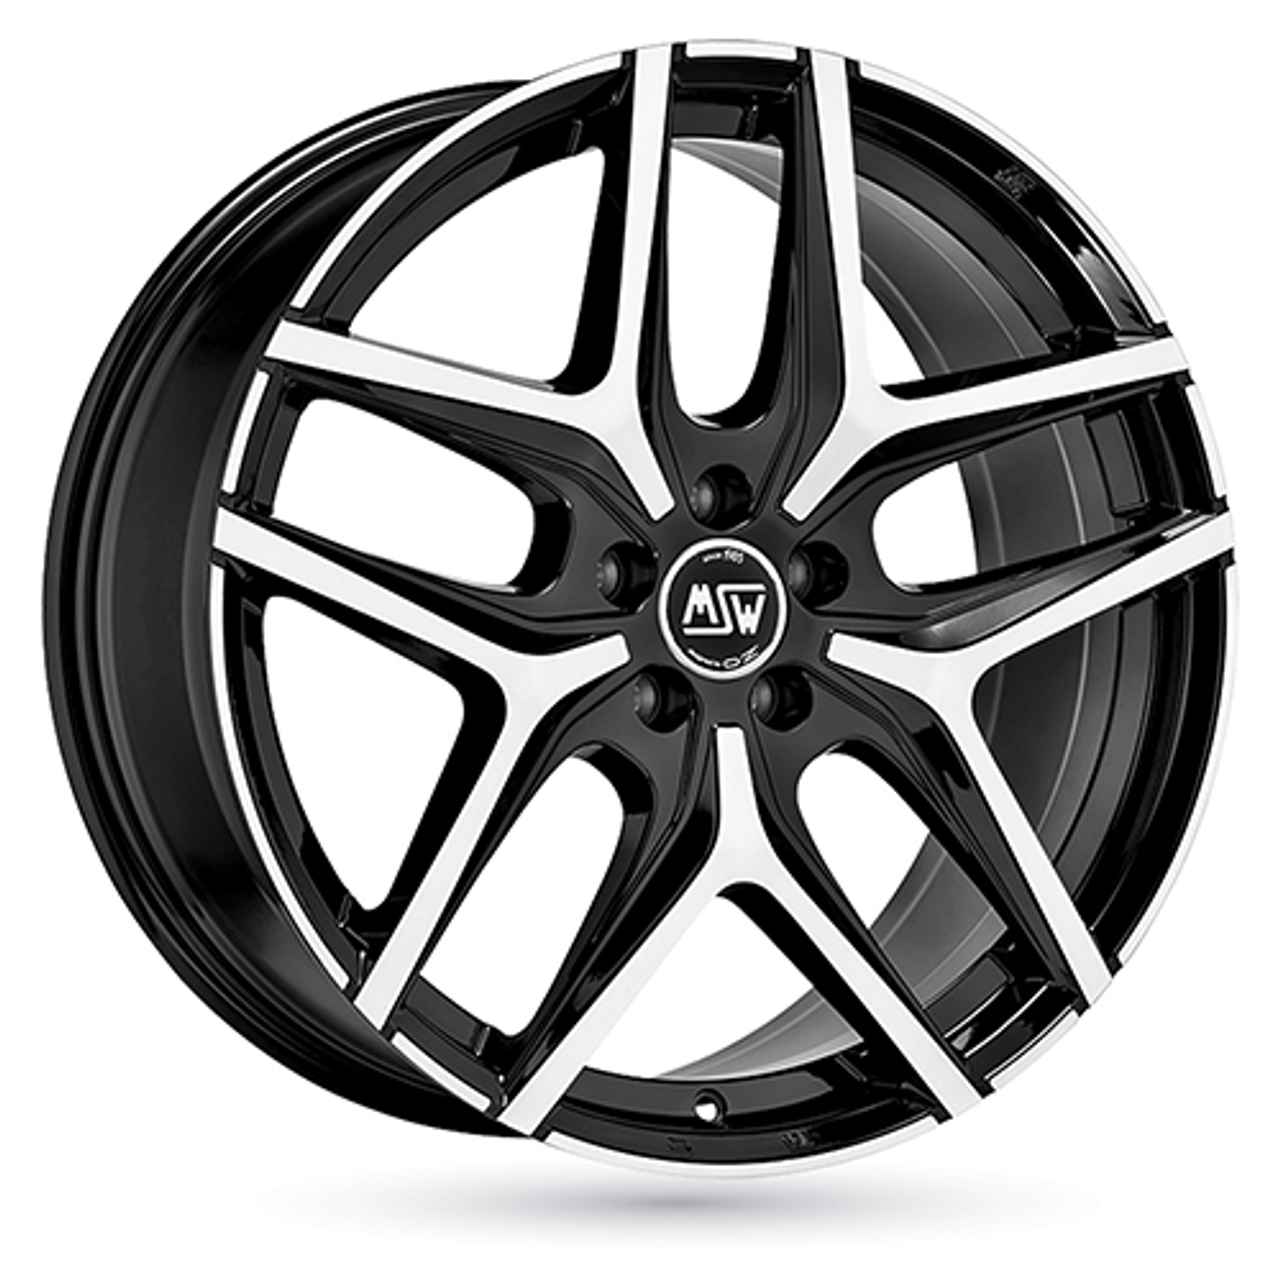 MSW (OZ) MSW 40 gloss black full polished 10.0Jx20 5x112 ET26